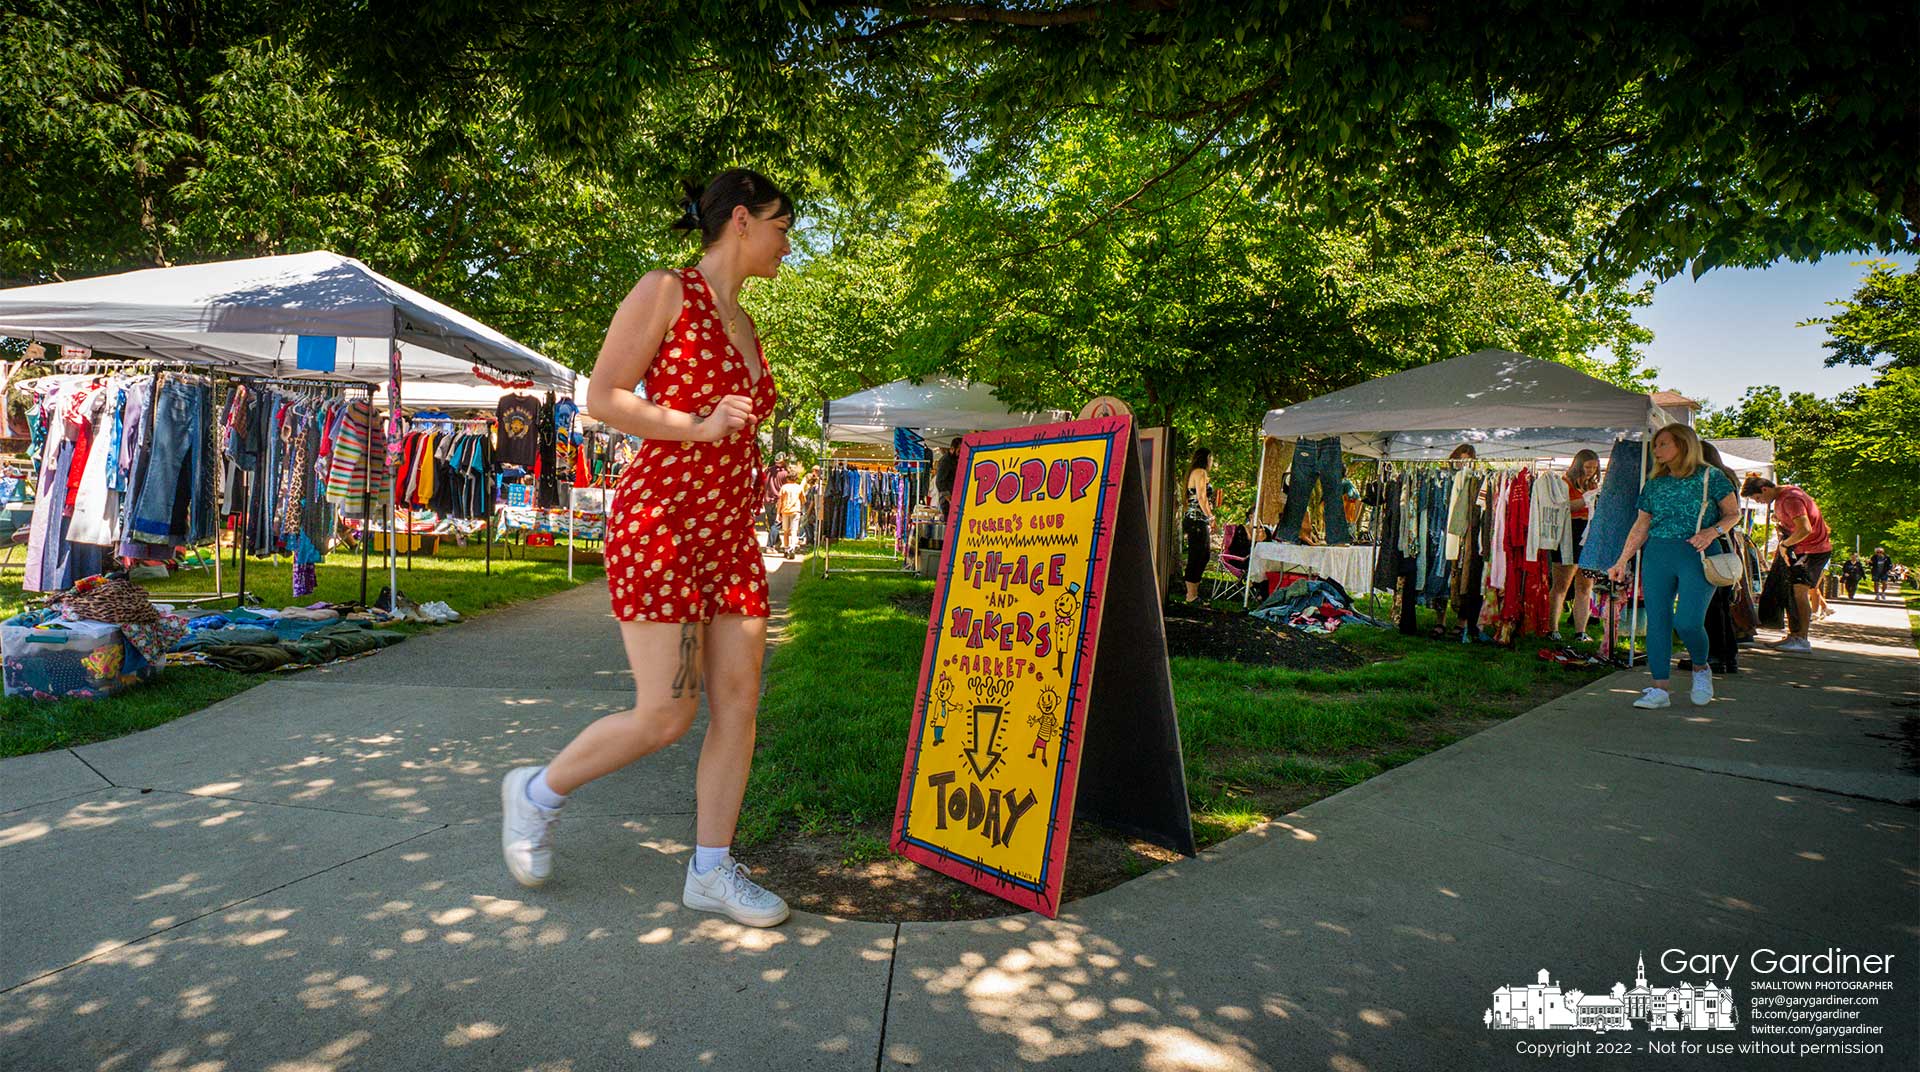 Shoppers sort their way through a selection of vintage and maker's booths at West Main and Grove Street during a popup market at Otterbein University. My Final Photo for June 4, 2022.